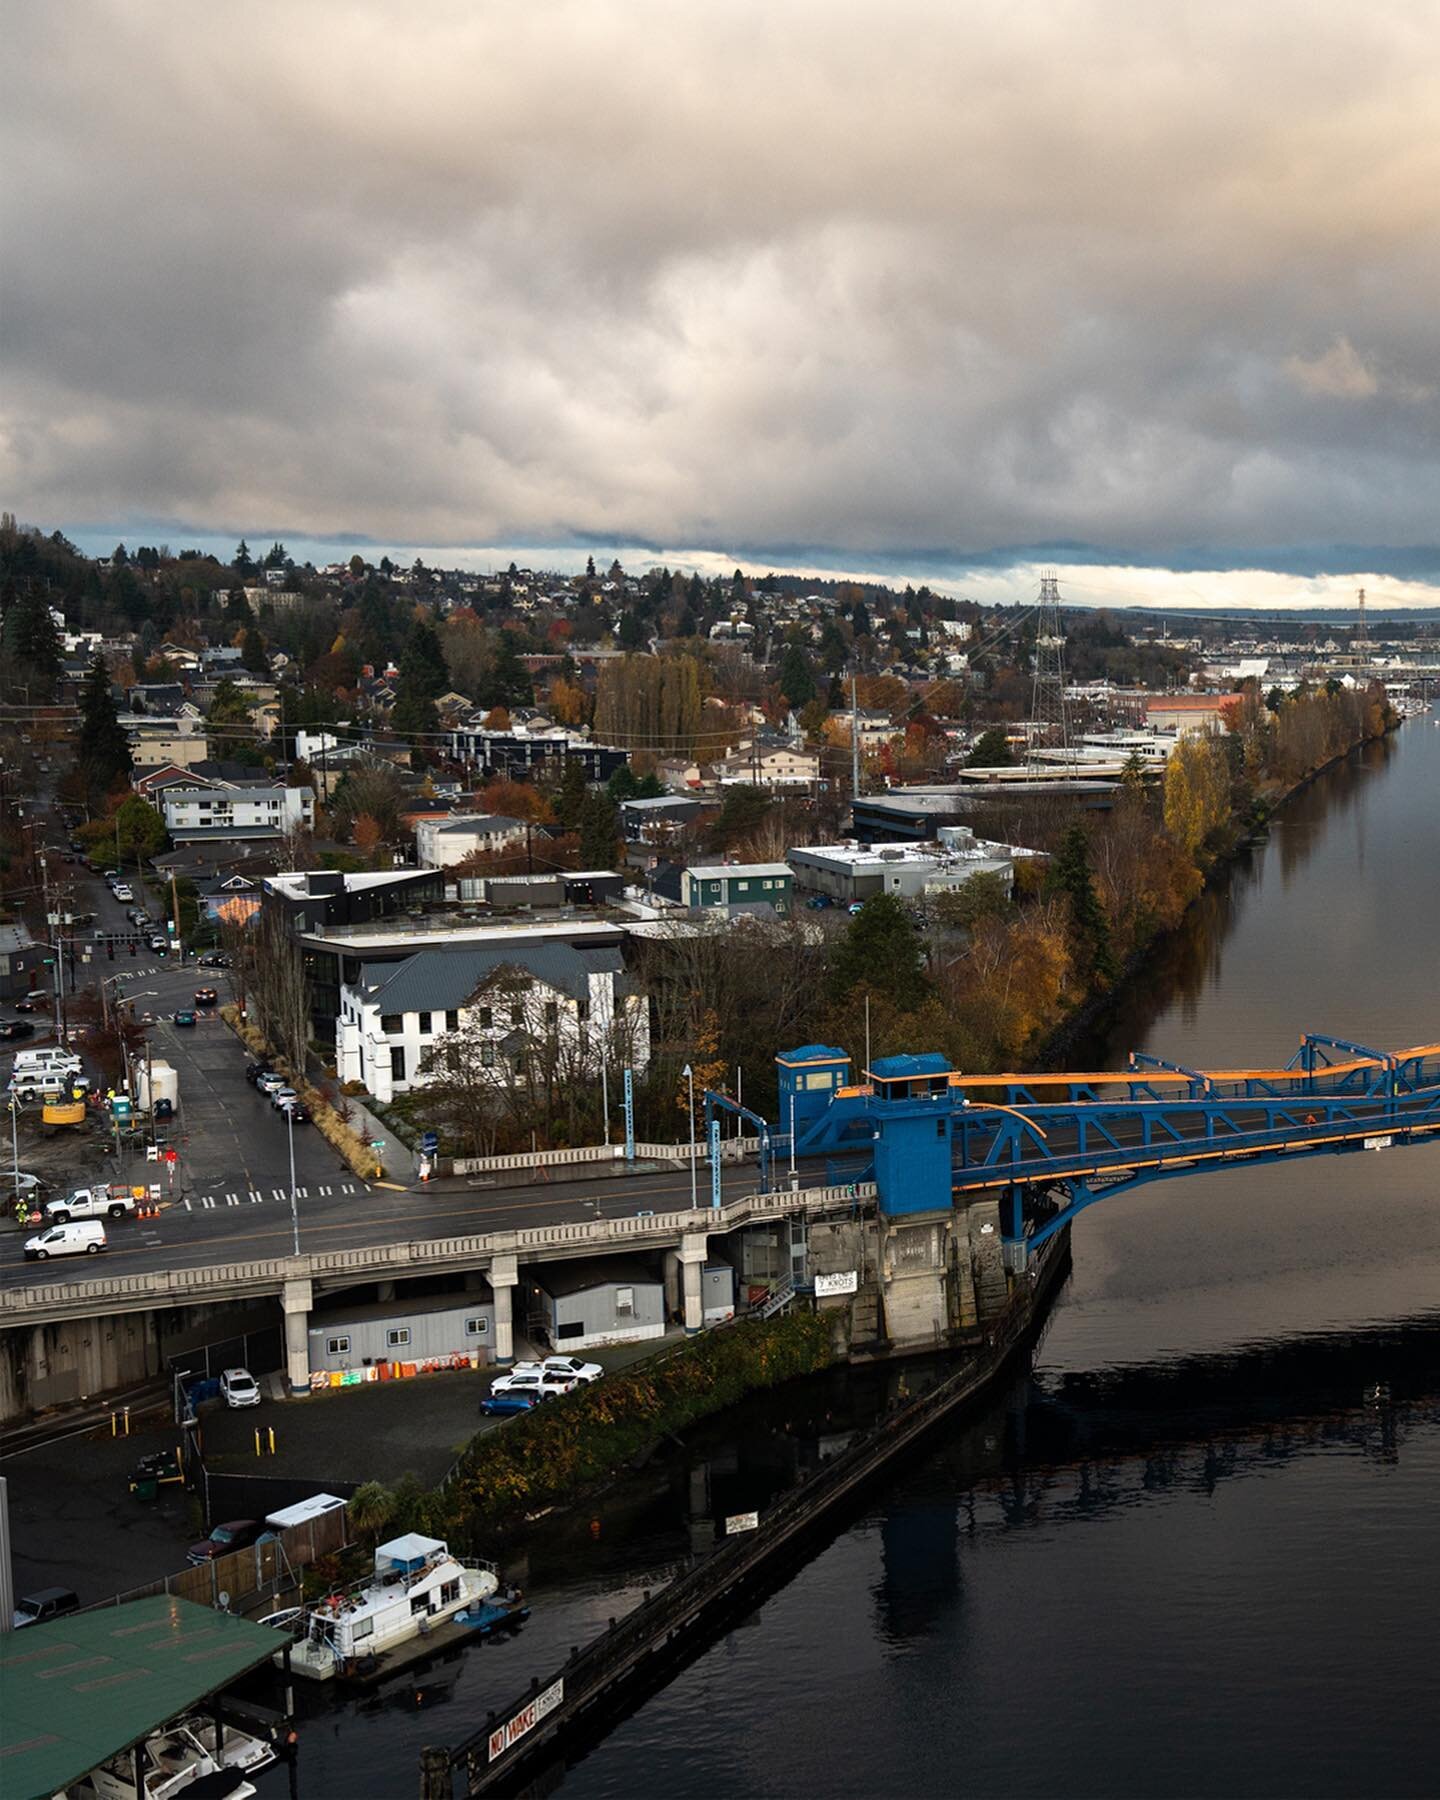 In 1916, the 5-year construction of the Fremont Cut was completed. This canal would eventually re-route Lake Washington&rsquo;s out-flow, render extinct Renton&rsquo;s Black River, and remove a 1,120 square mile watershed from the Duwamish River.
.
.